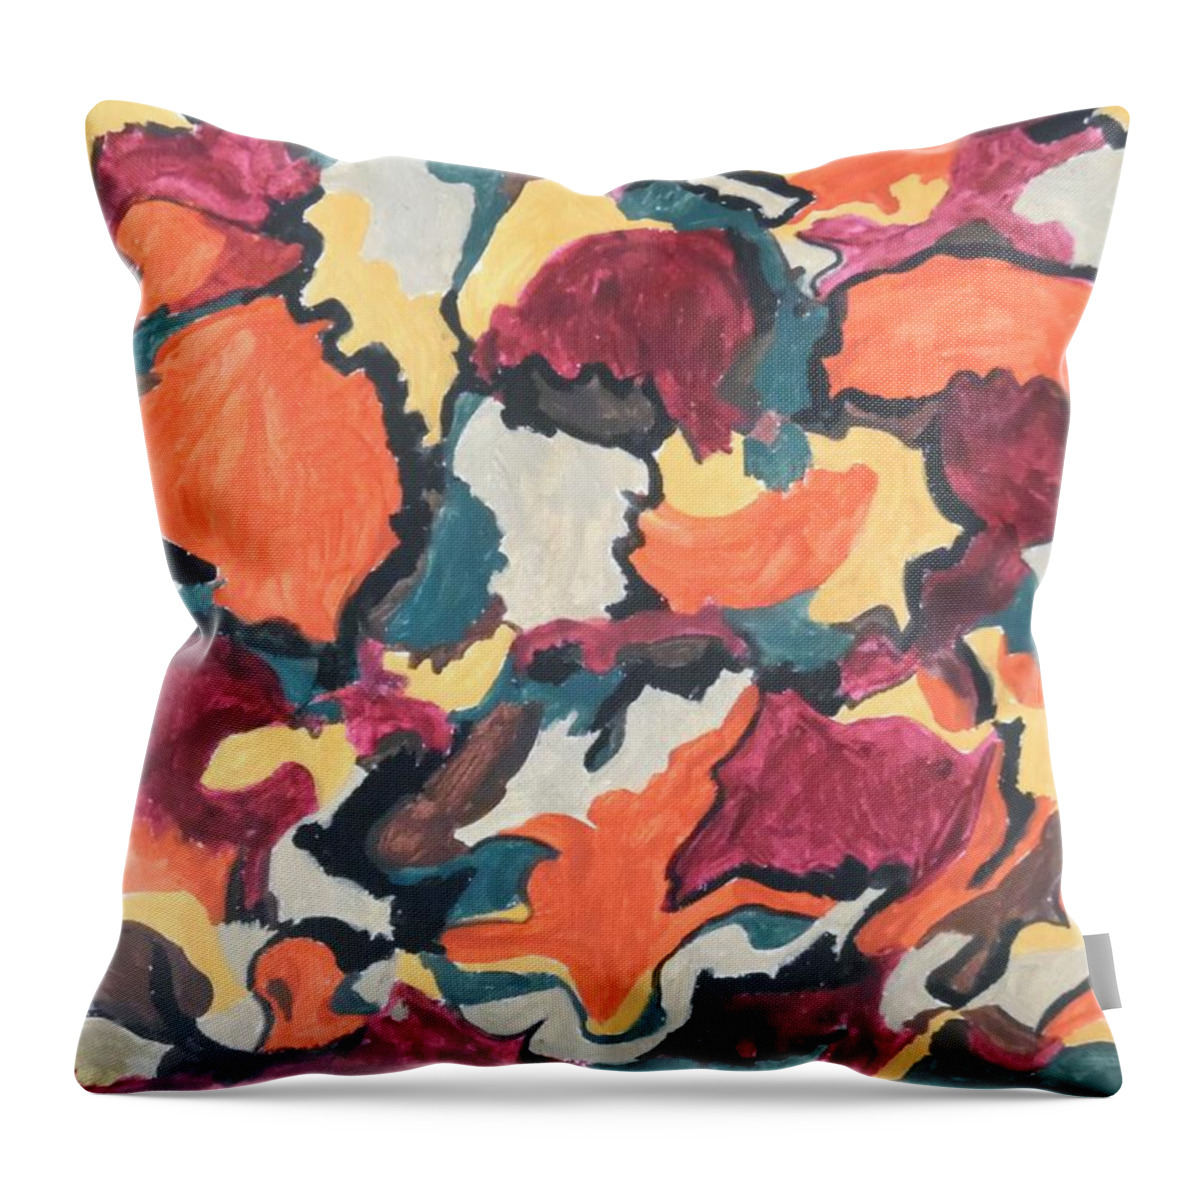 Falling For You Throw Pillow featuring the painting Falling for You by Esther Newman-Cohen